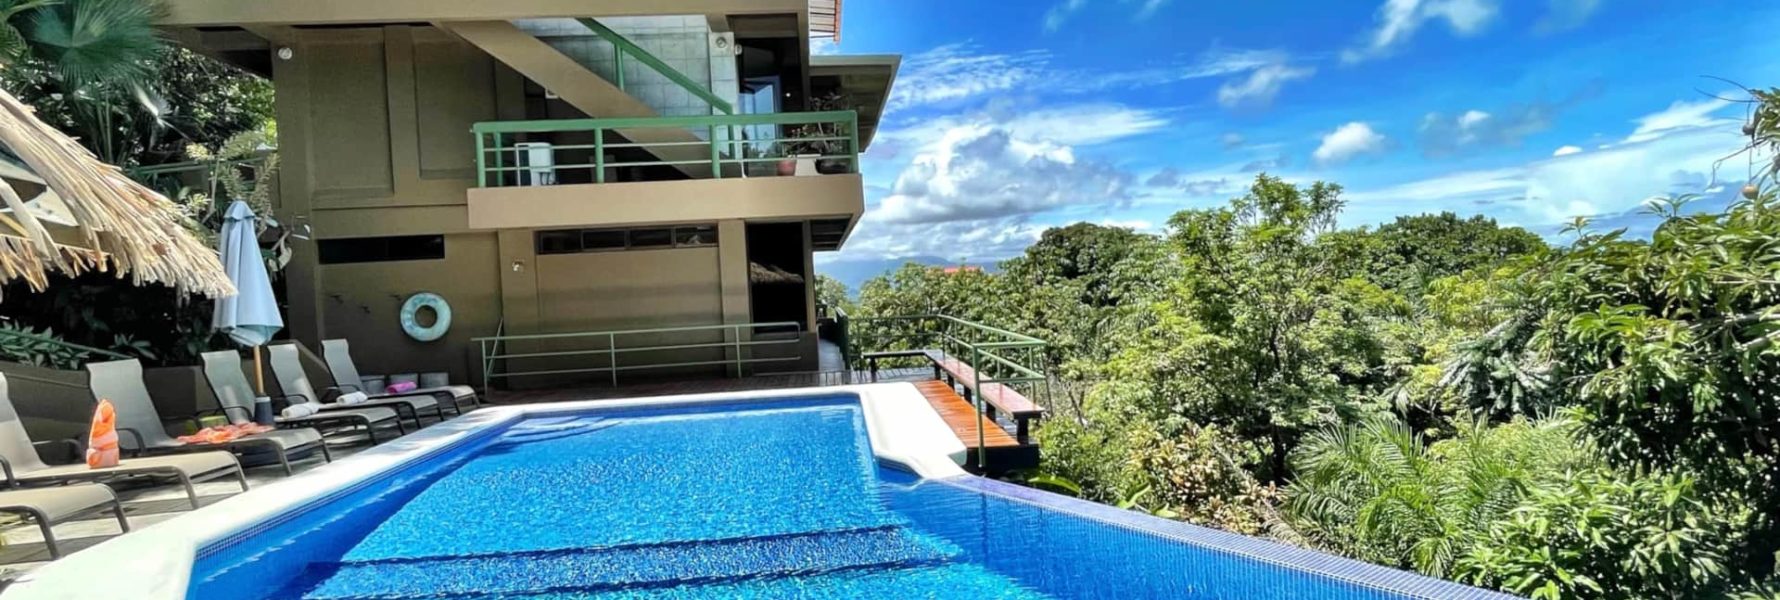 Sit poolside and relax for a cool swim at the edge of this infinity pool, while overlooking the jungle views as well.